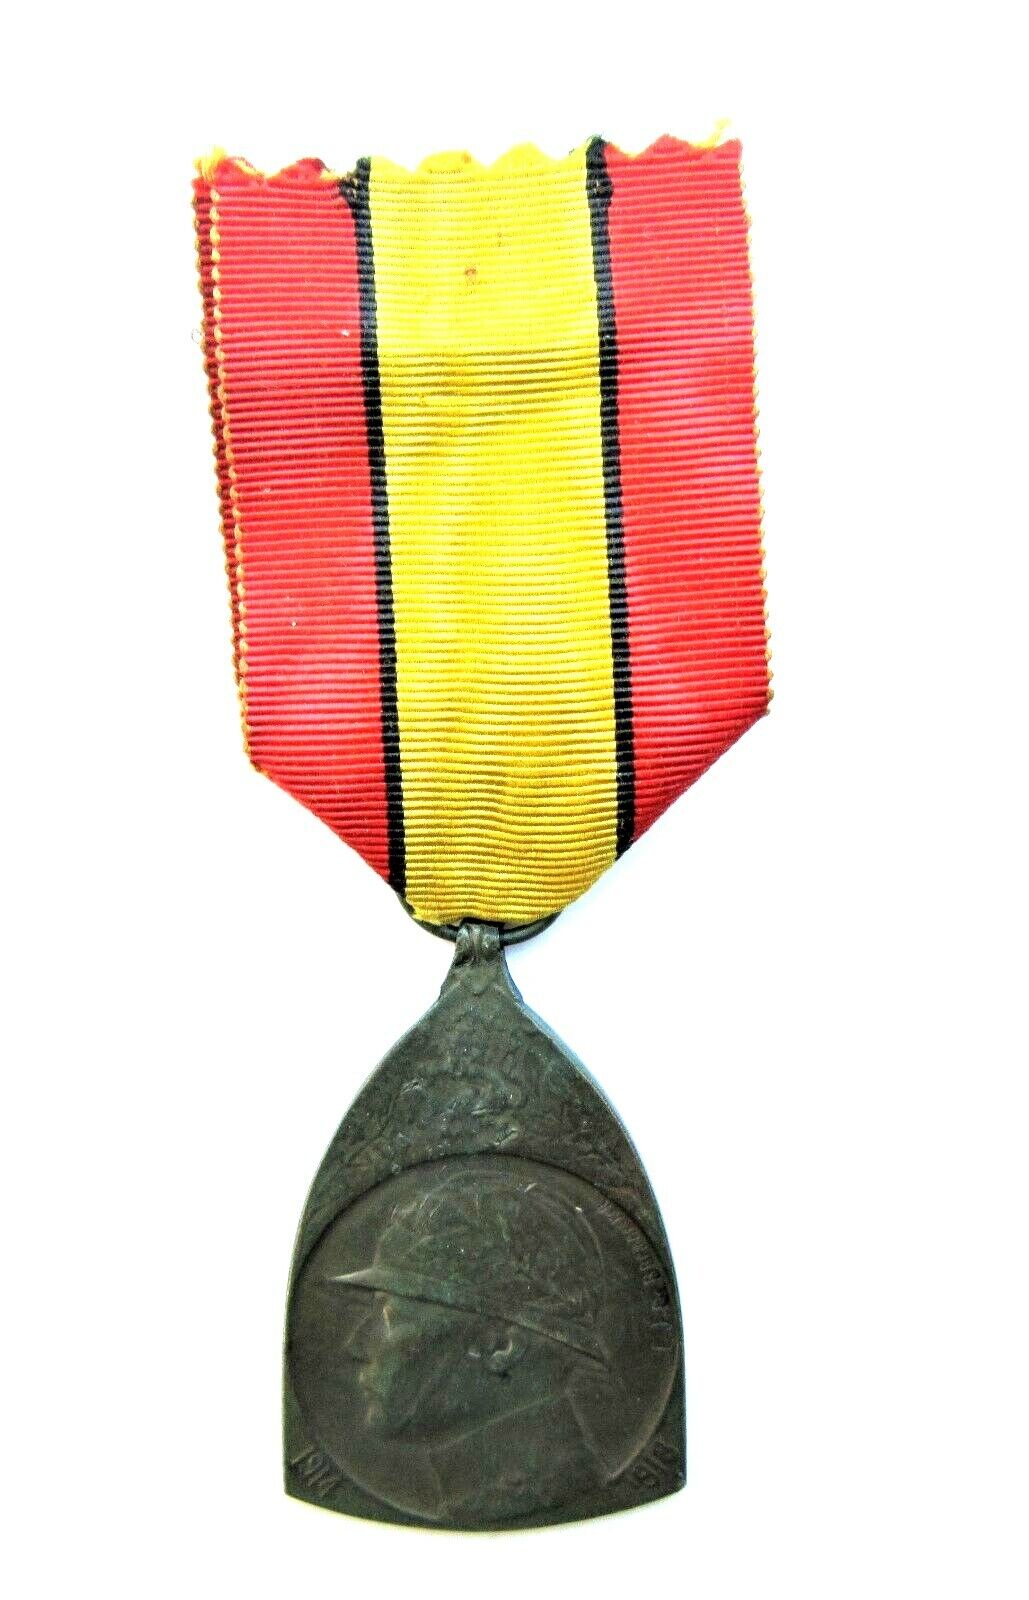 BELGIUM WWI COMMEMORATIVE MEDAL FOR THE GREAT WAR 1914-18 